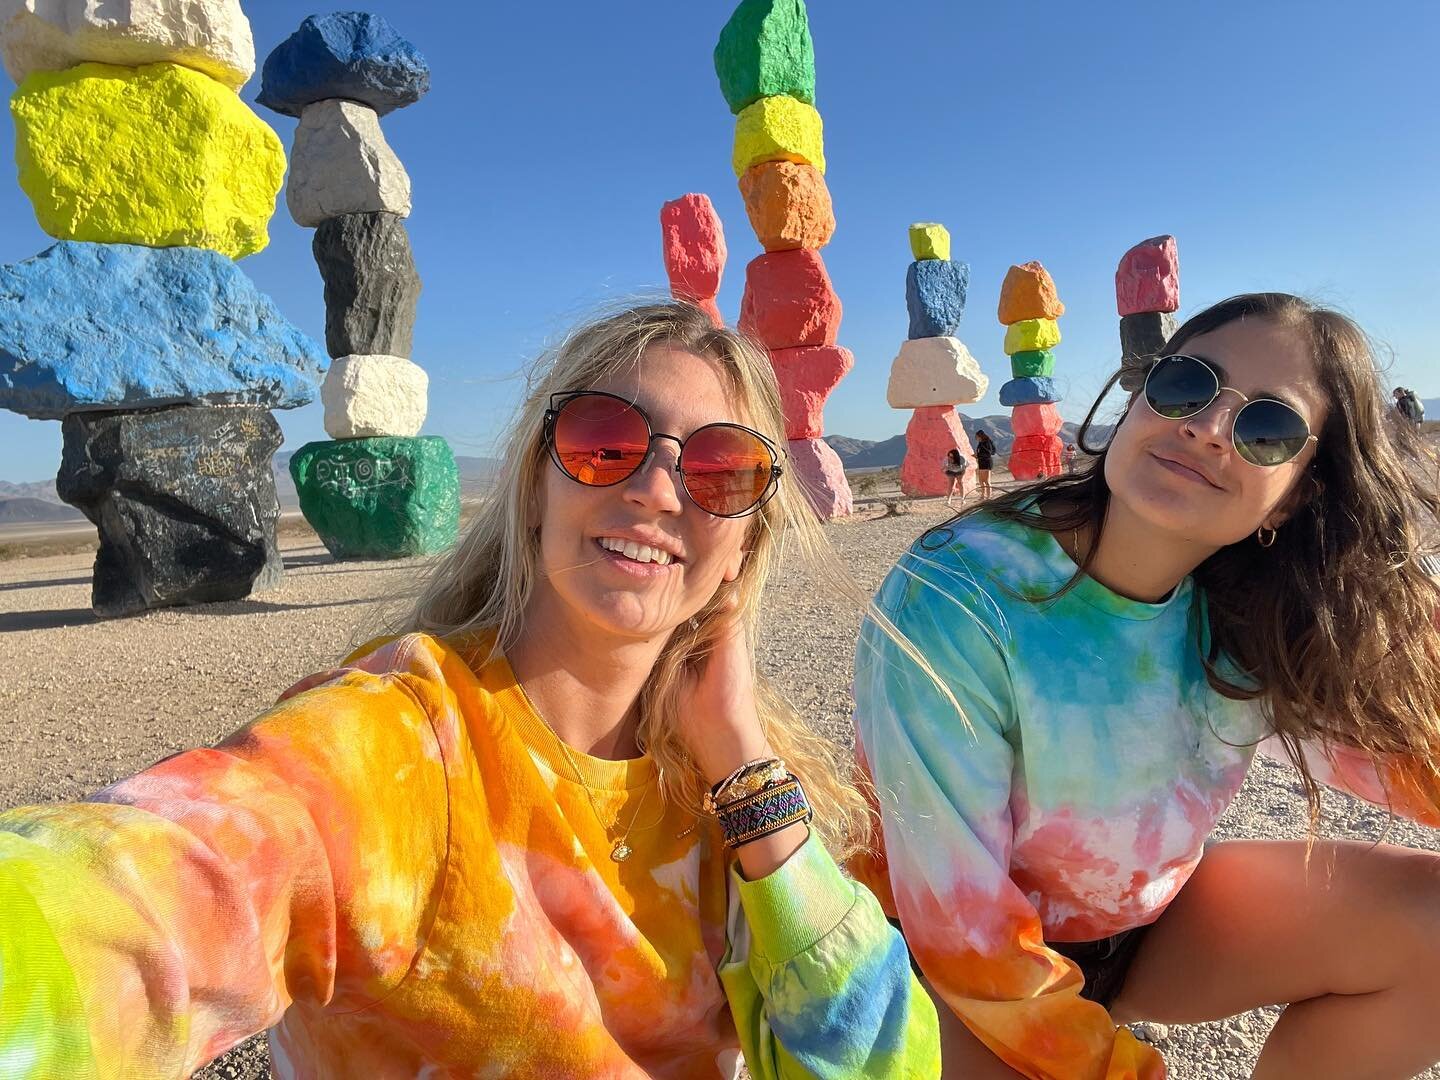 @futurefibers QT&rsquo;s in the wild! @azelinskie @lefunchi 🌈🗿🤘

#handdyed #textileart #textiledesign #color #colorfulclothes #icedye #icedyed #losangeles #ugorondinone